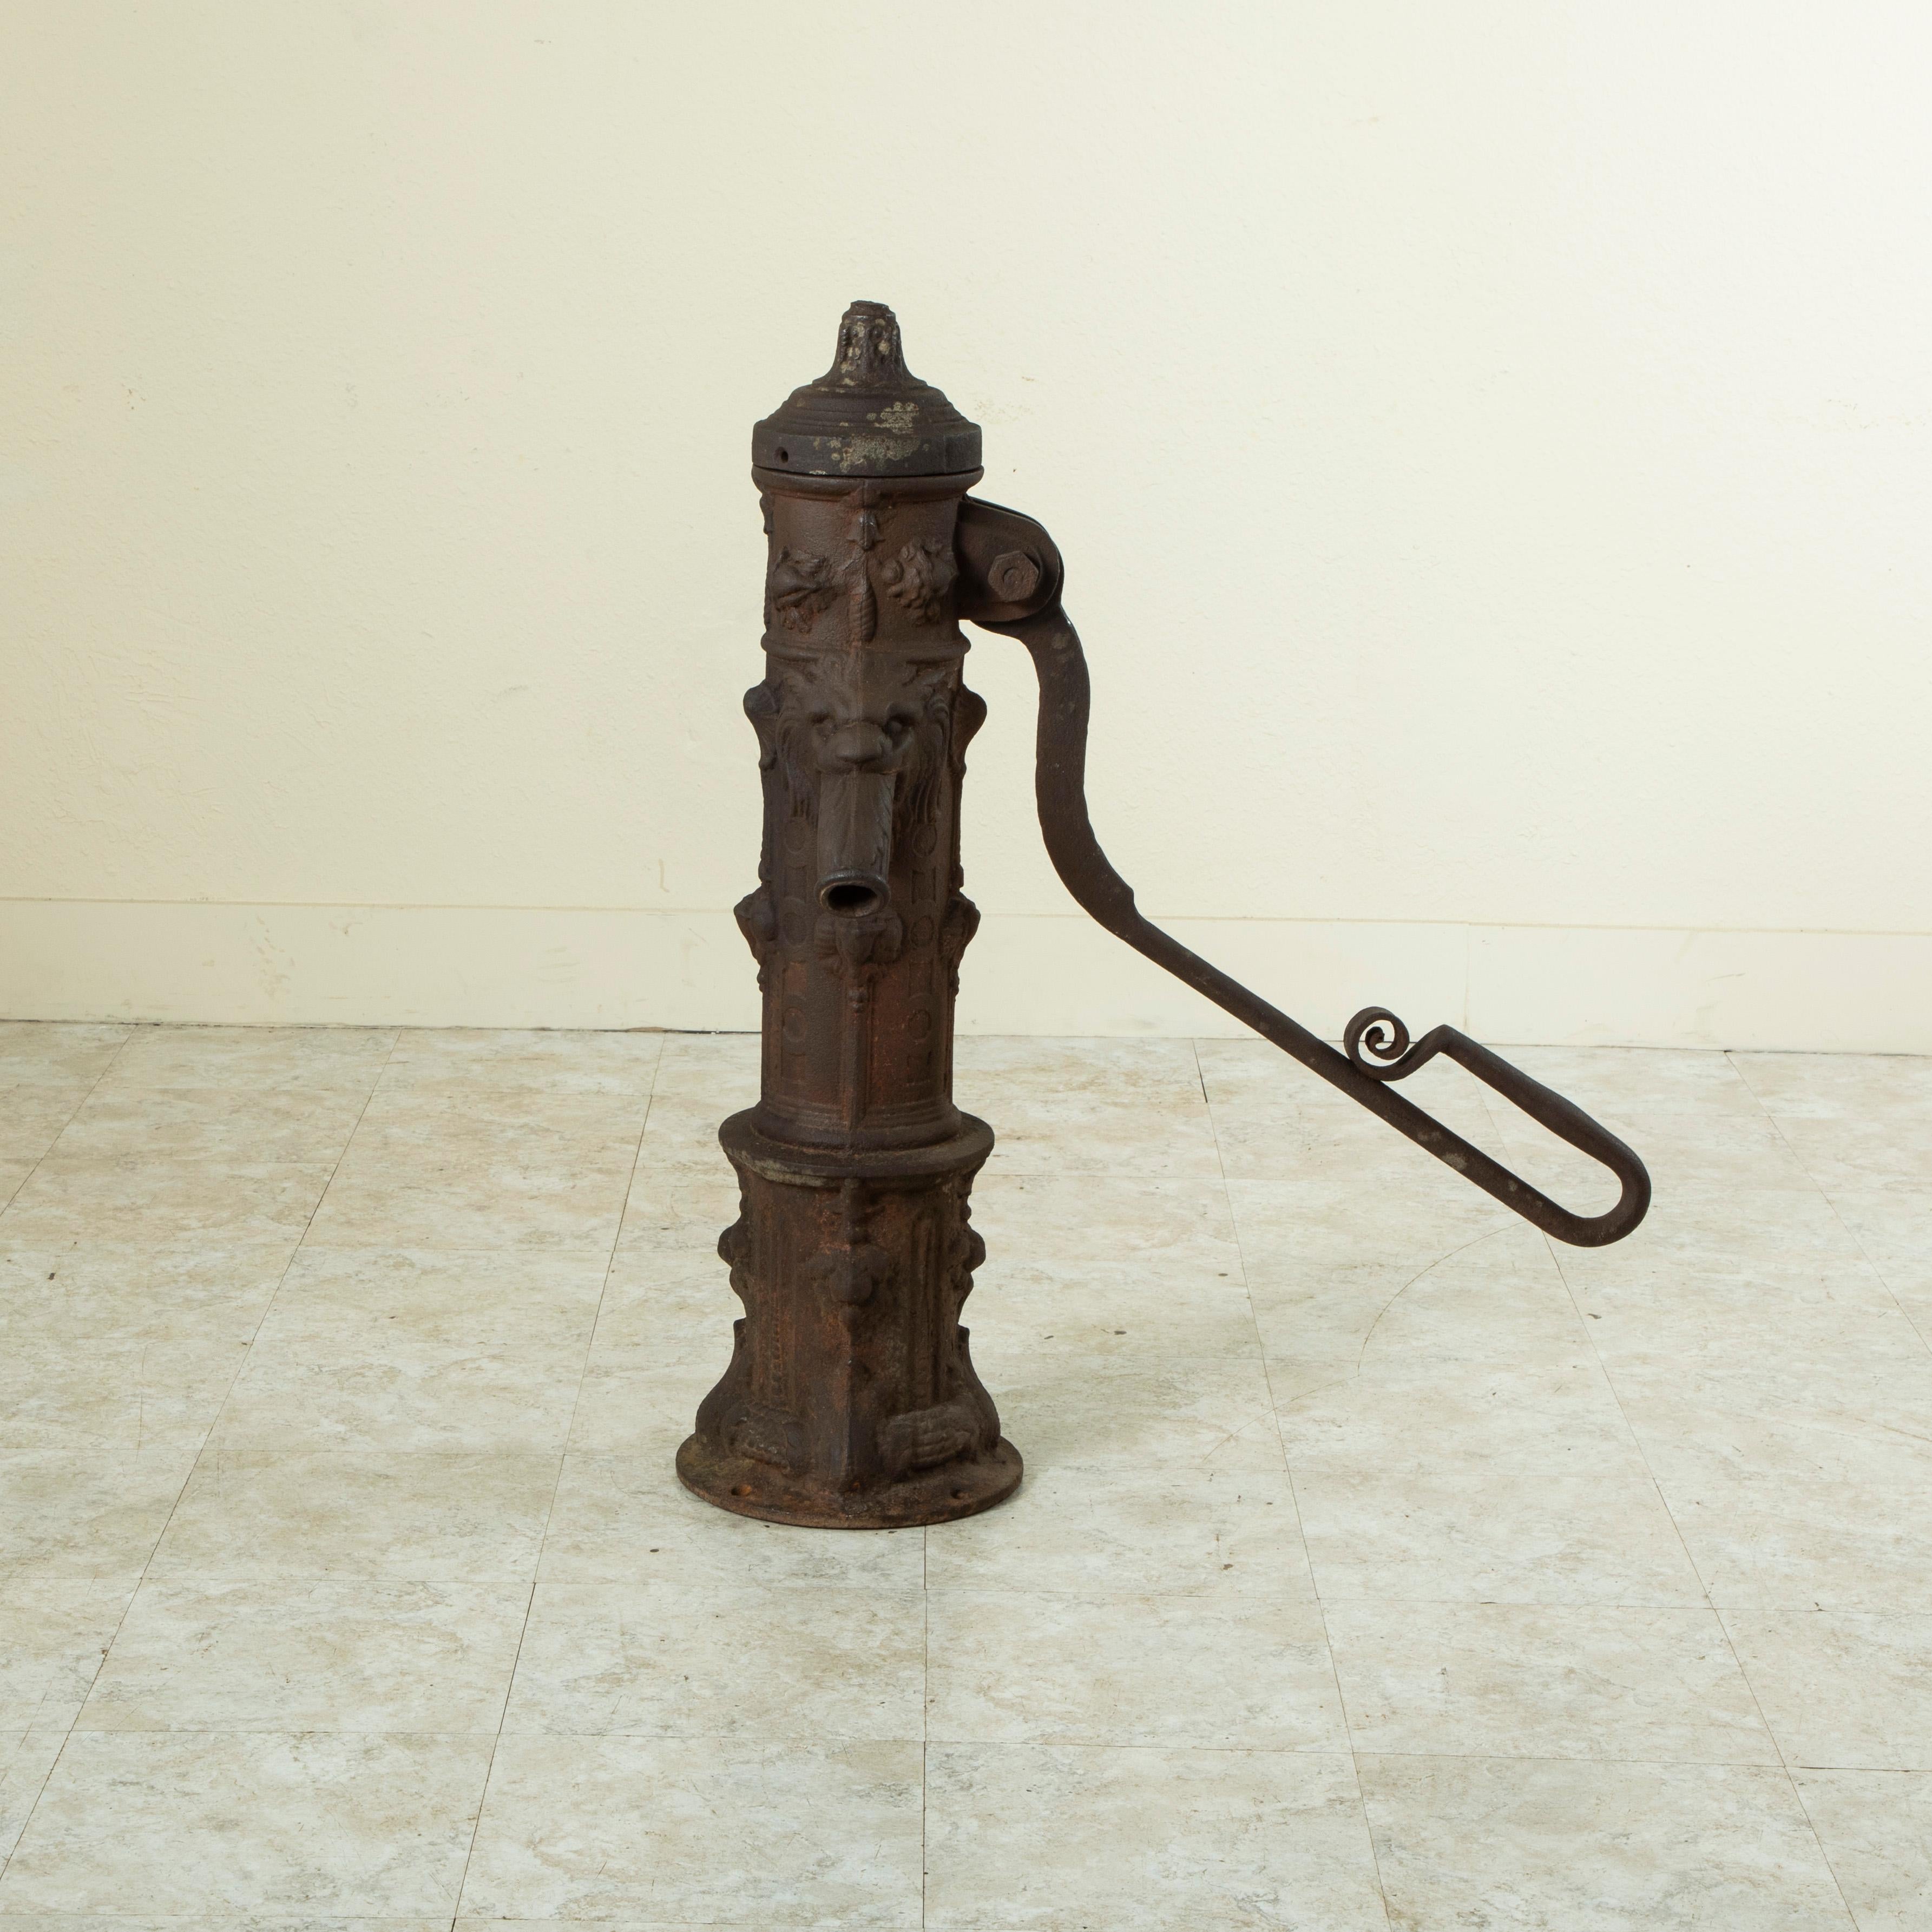 Found on a farm in Normandy, France, this late nineteenth century cast iron pump is marked by the maker A. Chappee (Armand Chappee 1835-1922). Chappee was a well known iron manufacturer based in the city of Le Mans. This pump features a spout